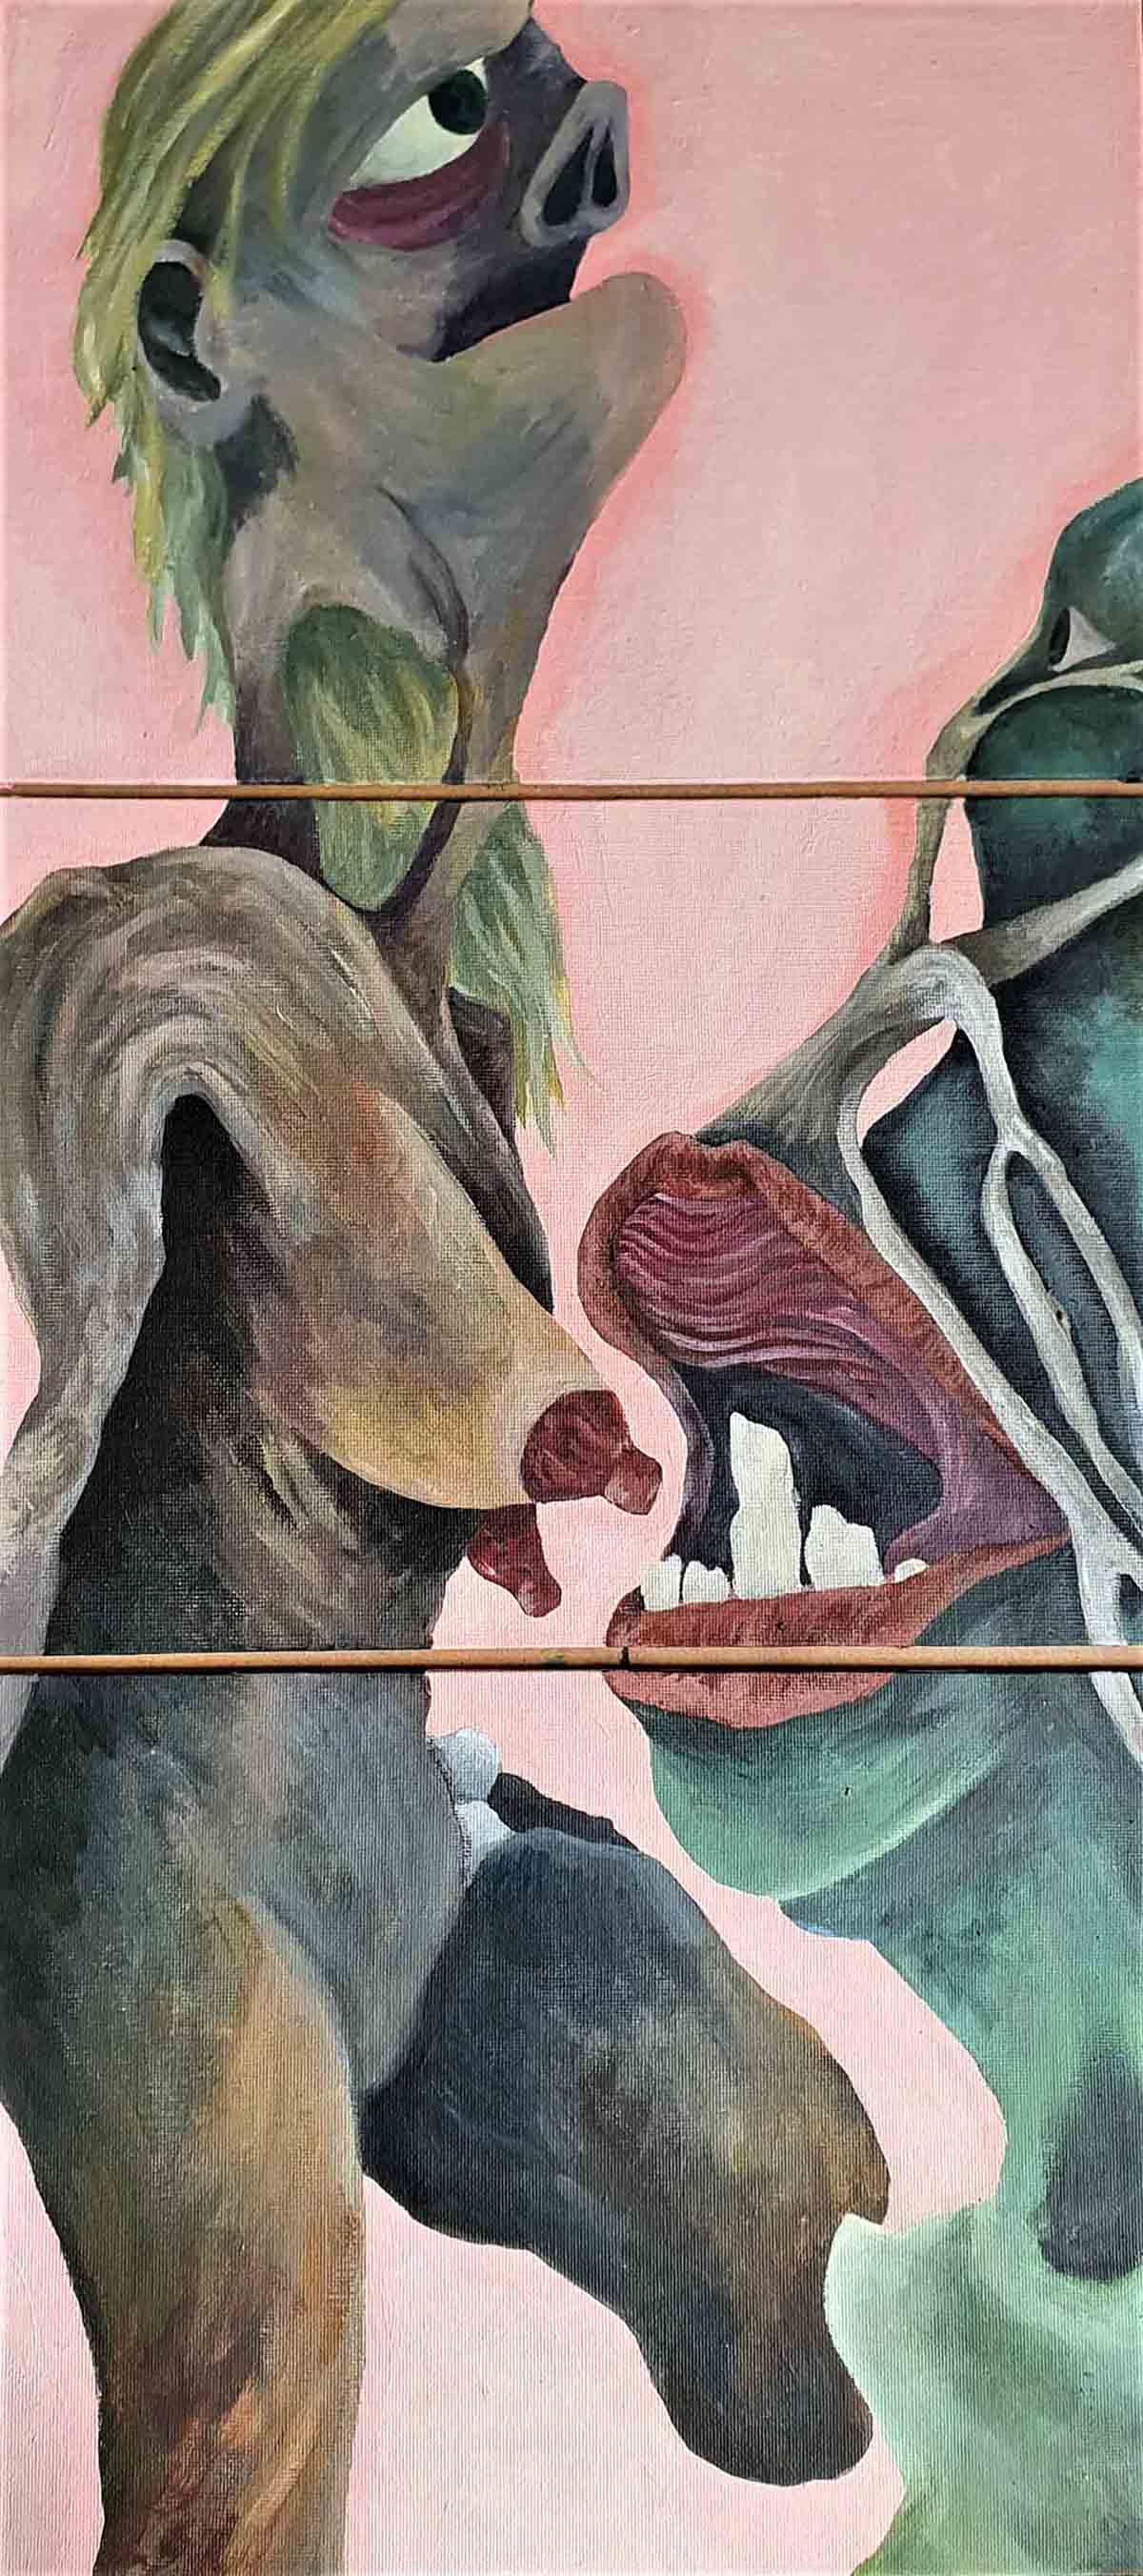 Acrylic triptych. Naked woman stands as alien organism attempts to suckle at her breasts.